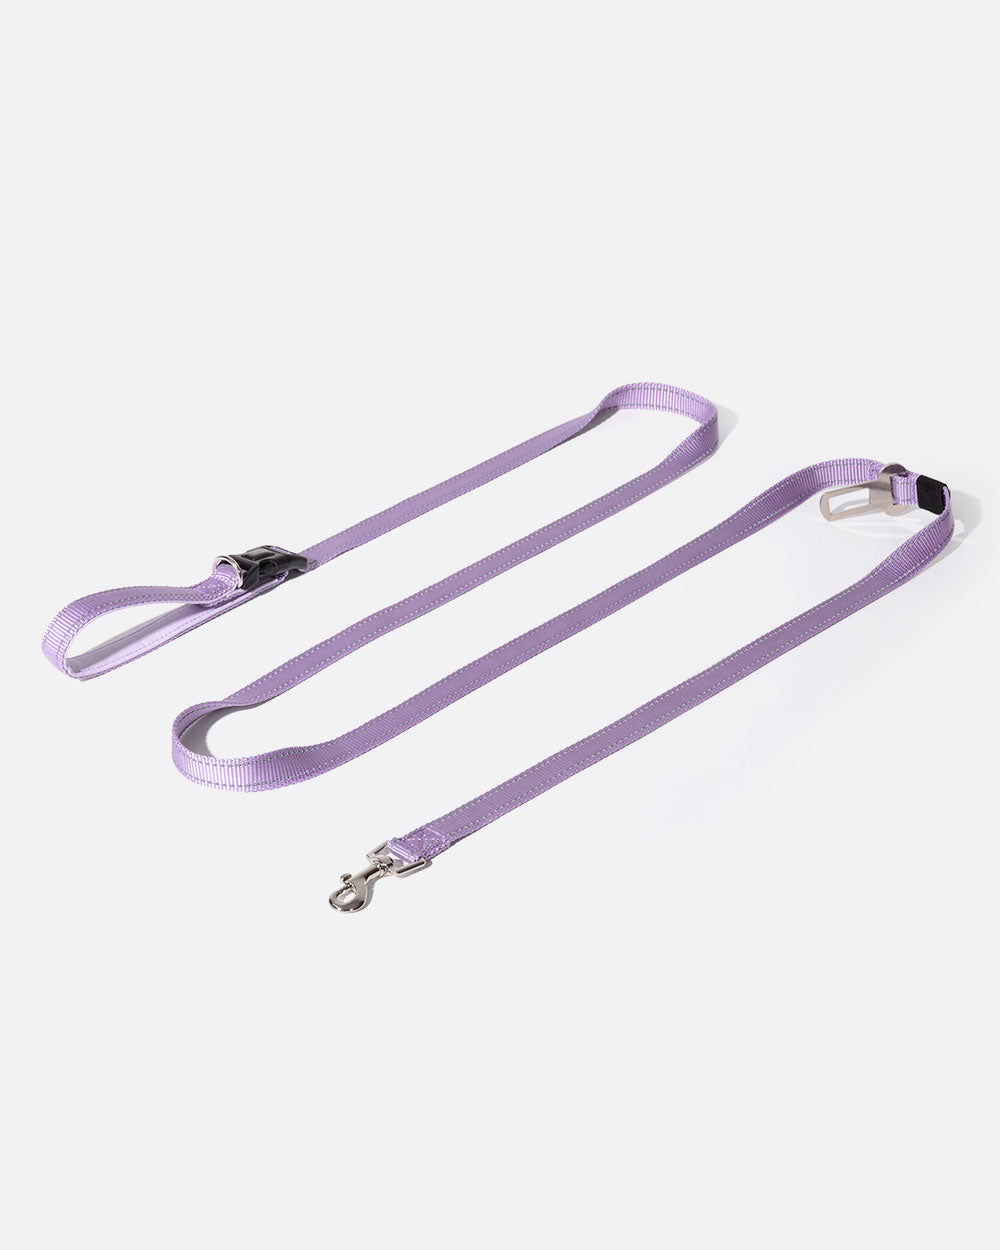 Dog Leashes, Strong, Adjustable and Reflective